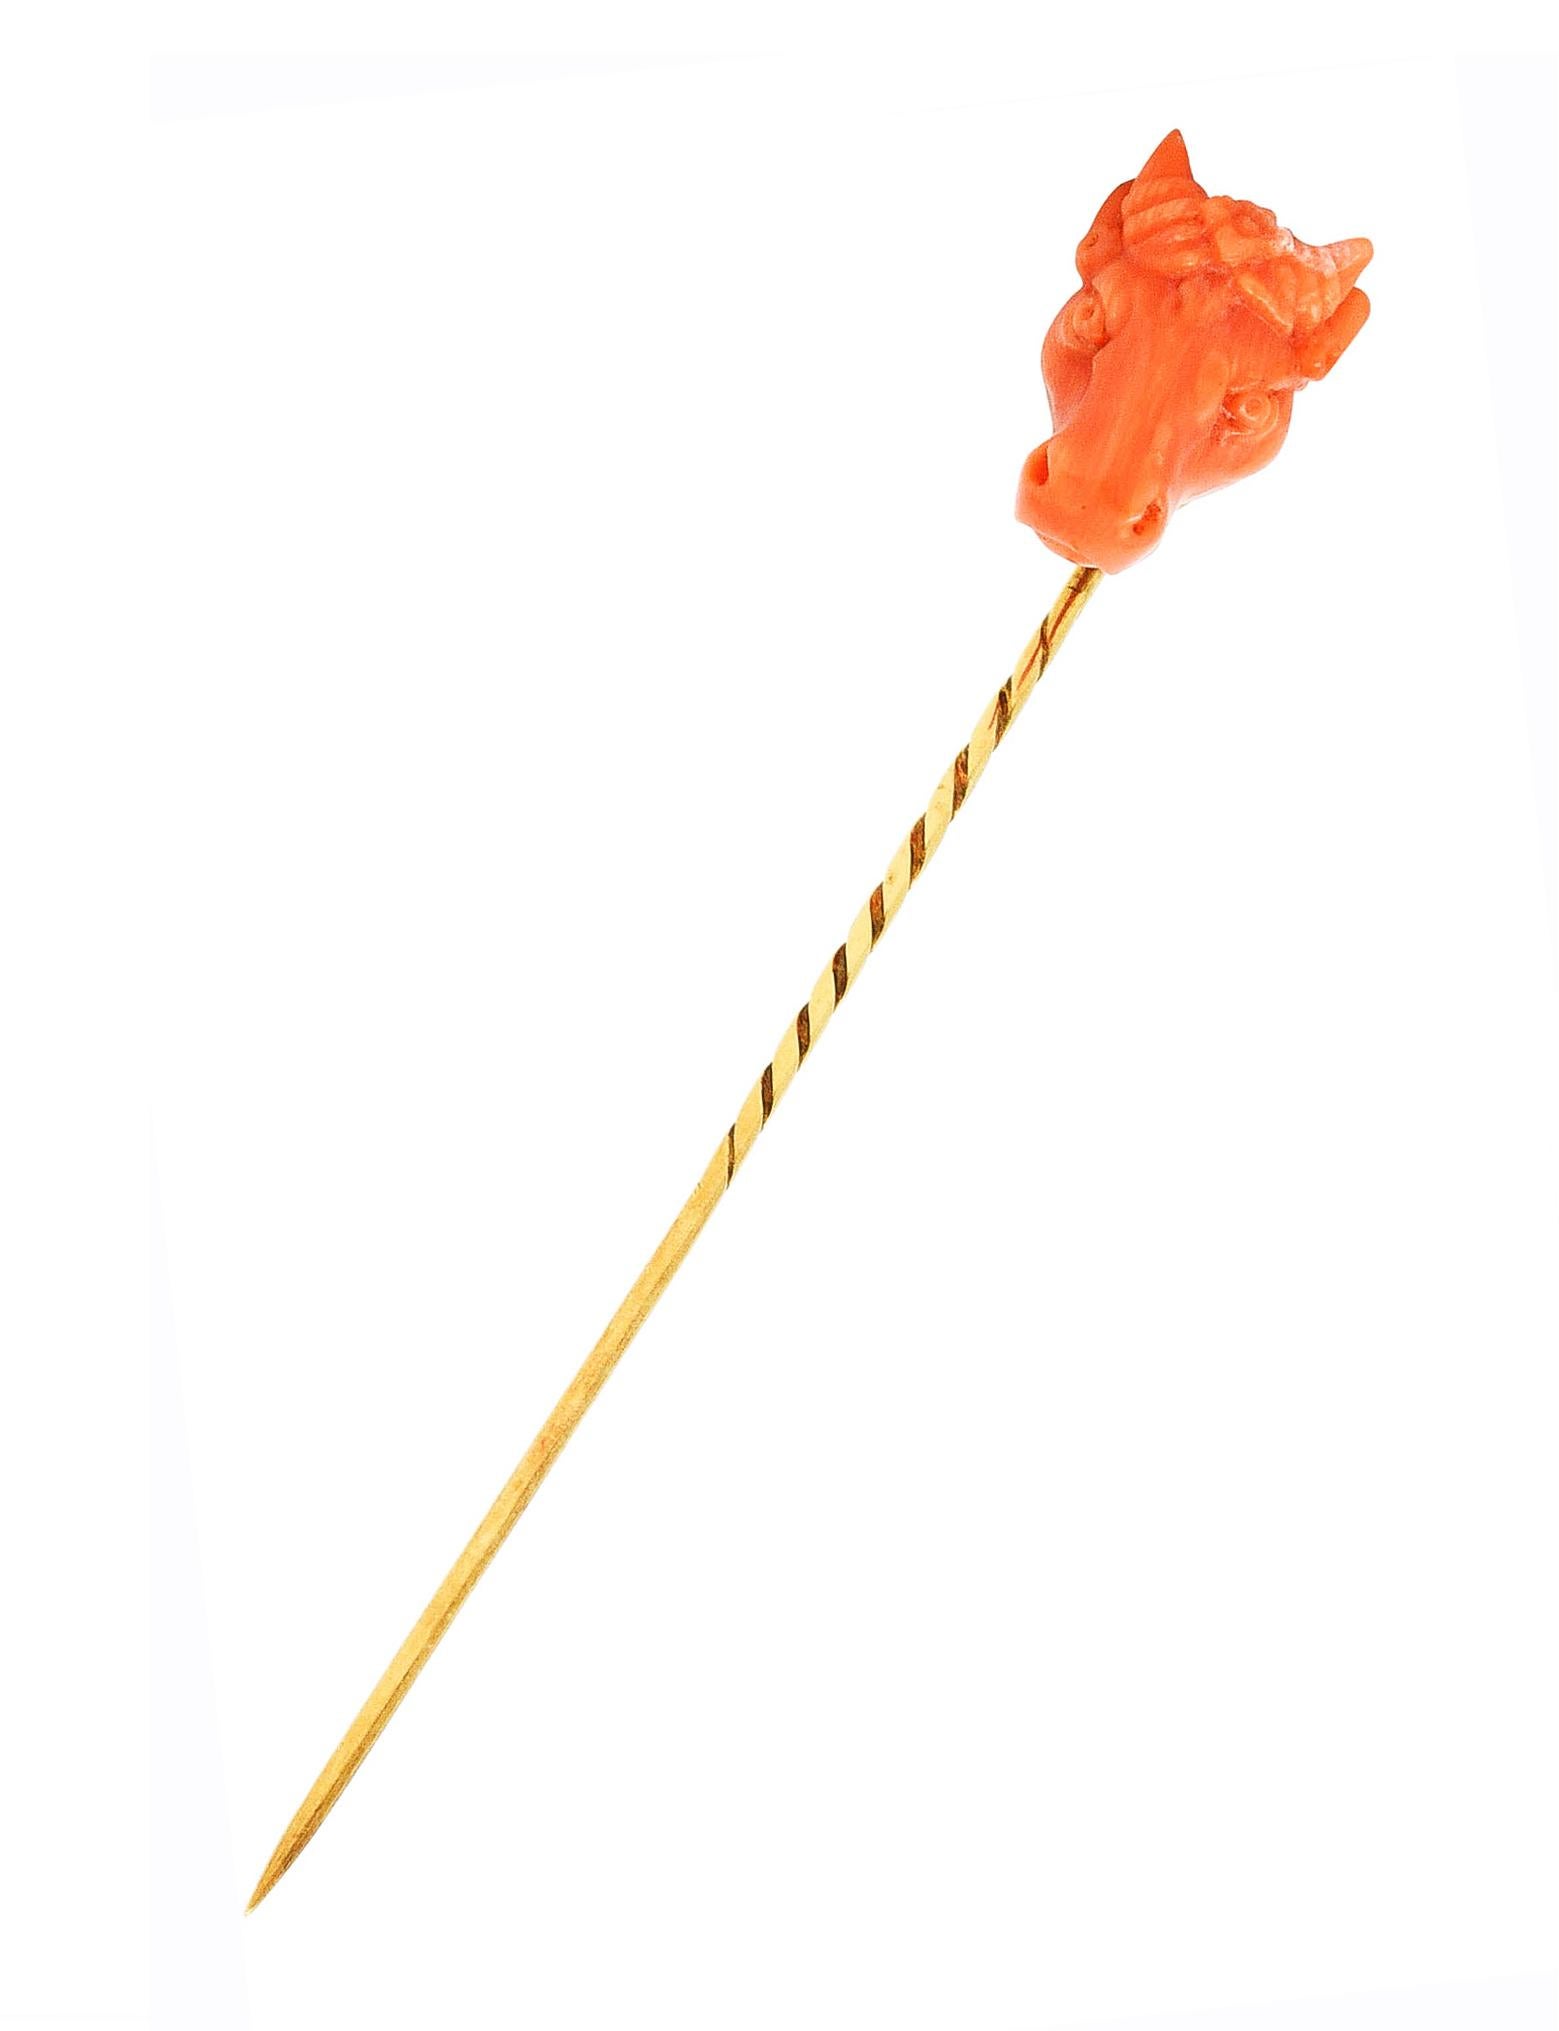 Stickpin features coral carved to depict the head of a bull with flower crown

Opaque reddish orange in color with medium saturation

Symbolizing the Greek god Zeus in the myth of Europa

Completed by swirled pinstem

Tested as 14 karat gold

Circa: